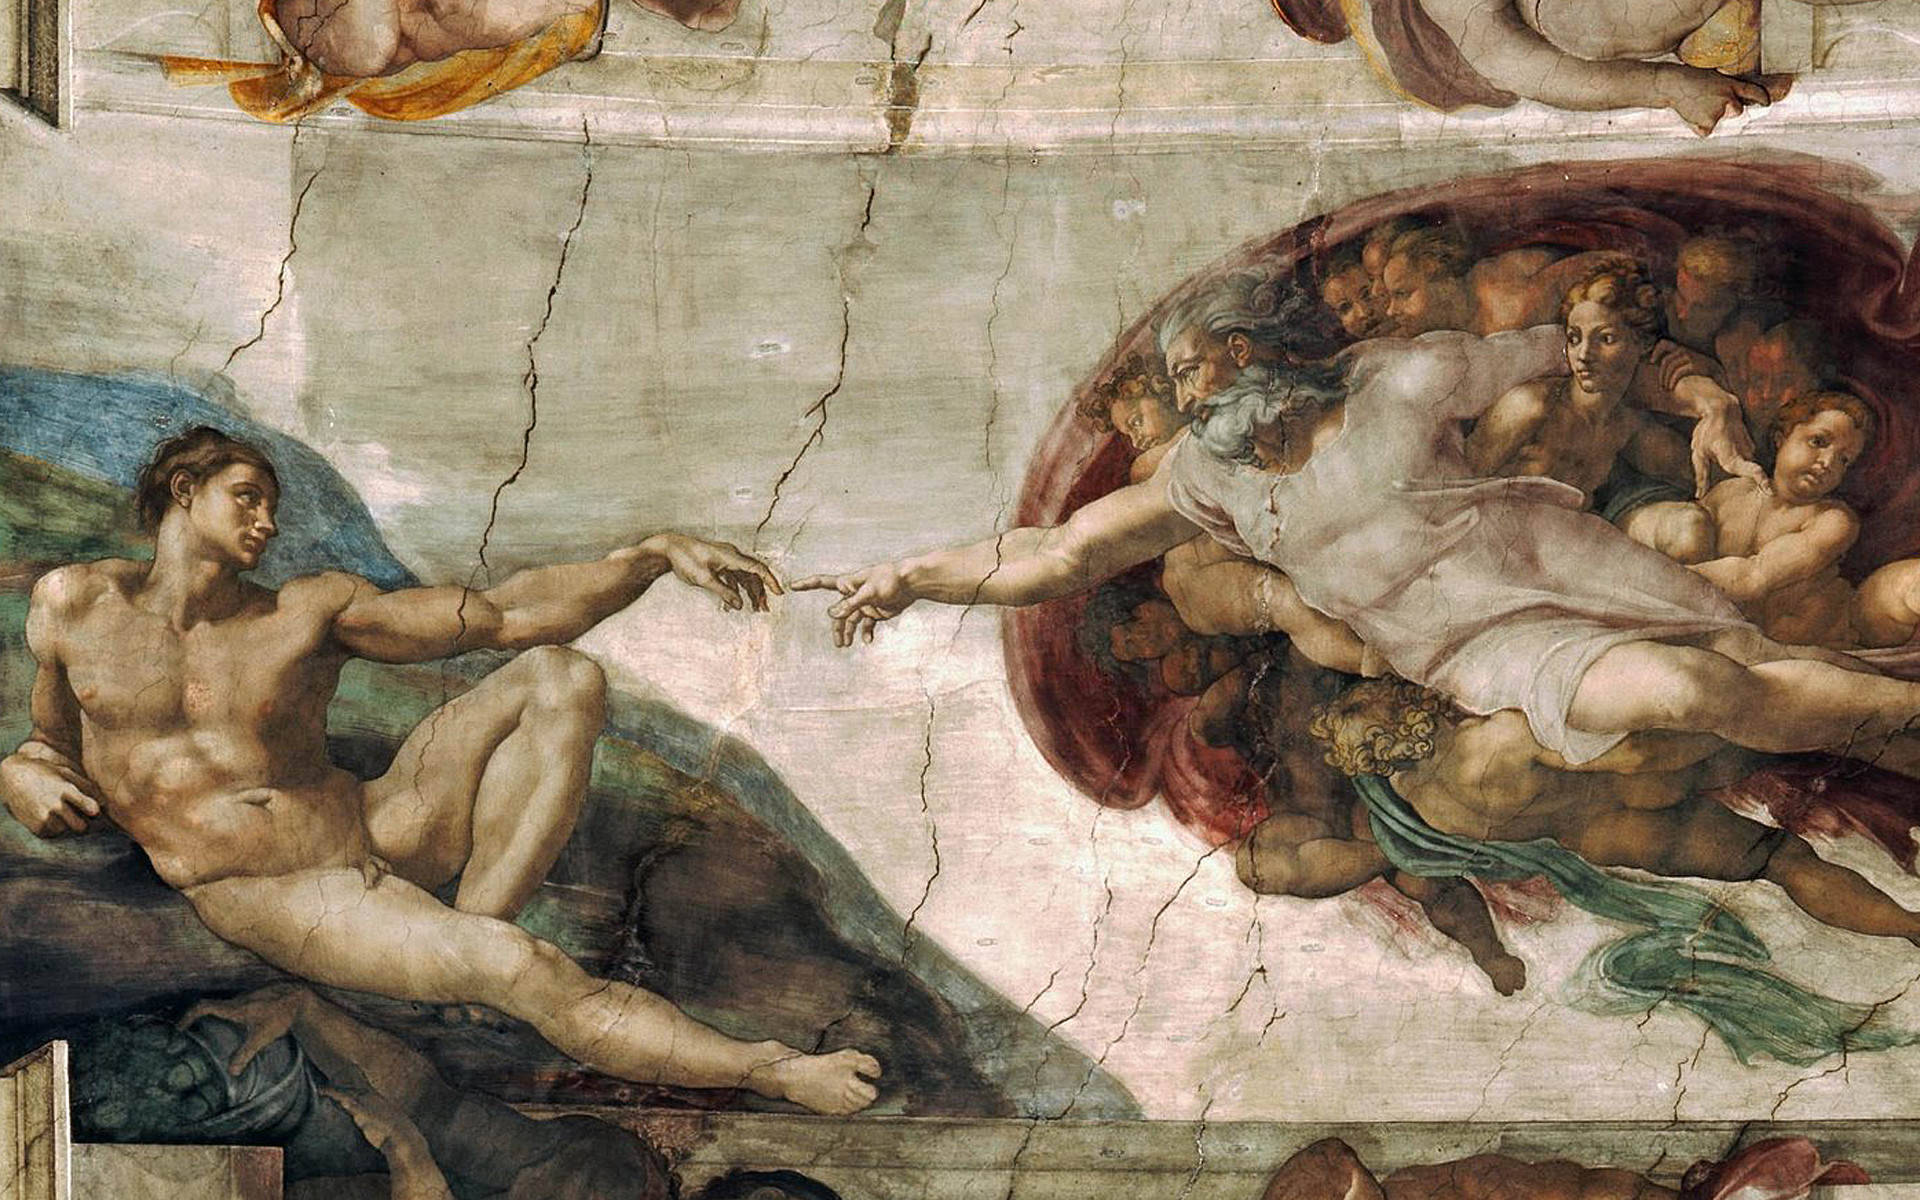 Divine Connection - Hand of God reaching out to Adam, as depicted in the Sistine Chapel Wallpaper